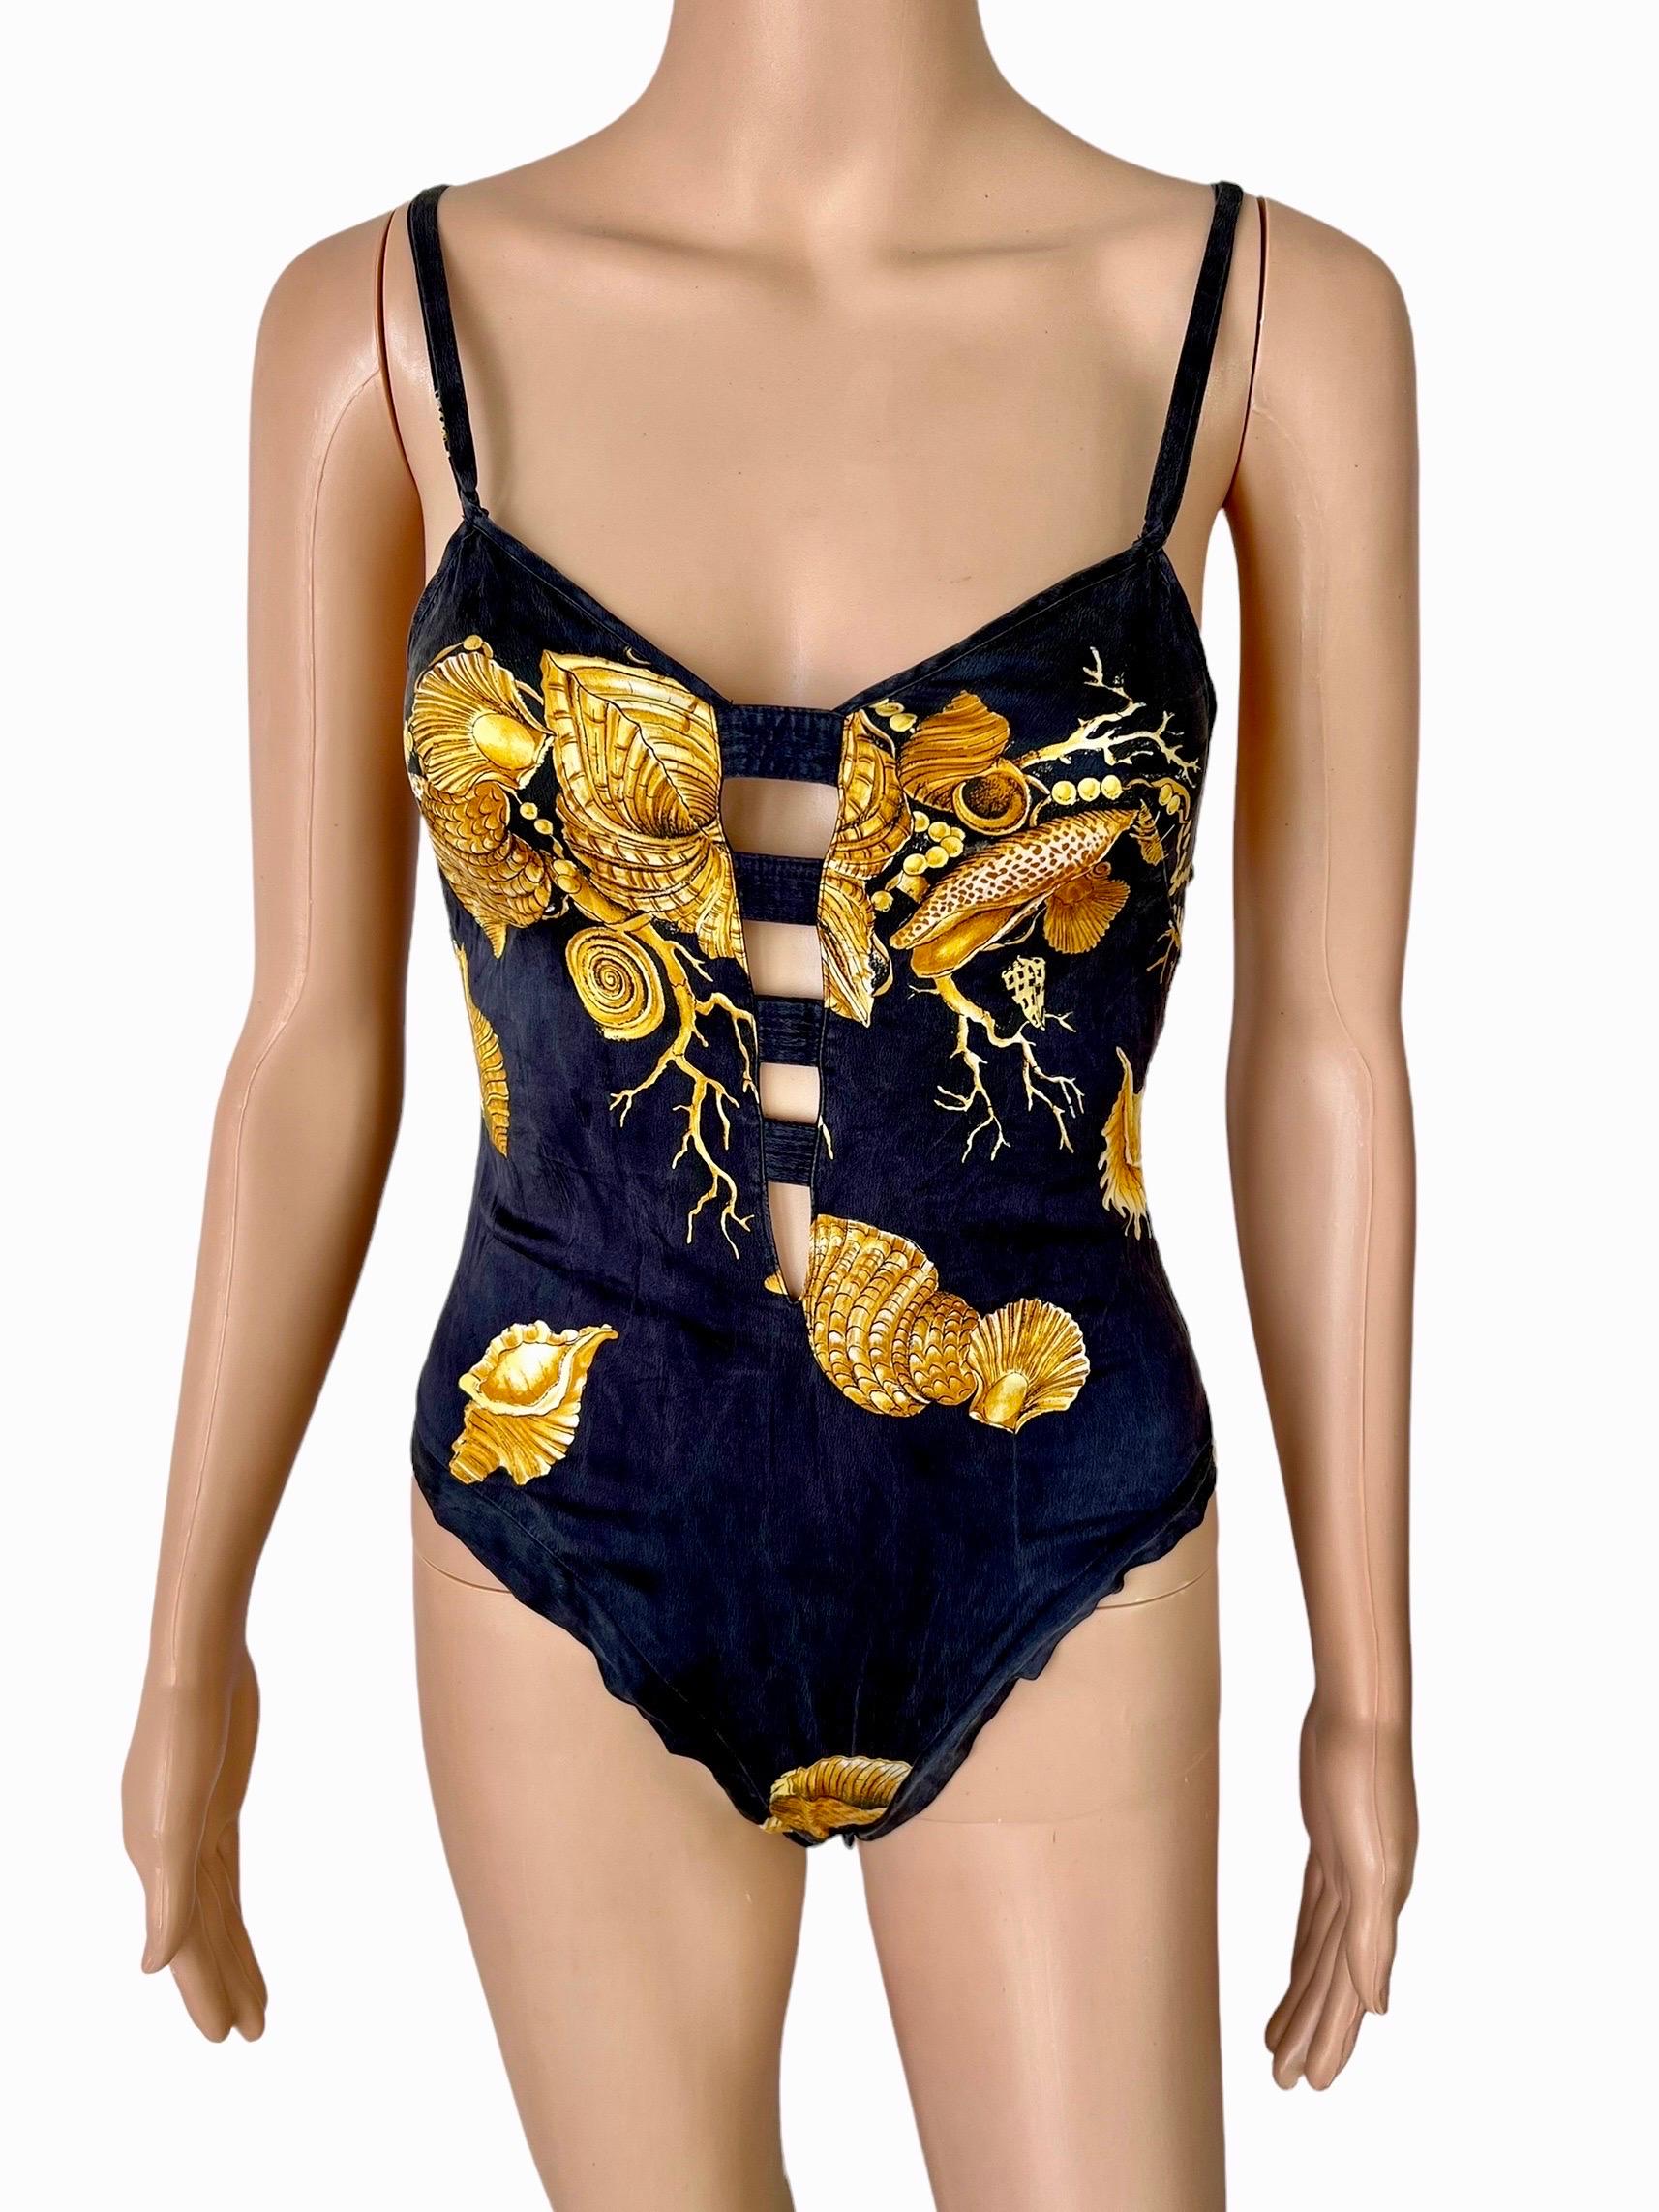 Gianni Versace Intimo S/S 1992 Vintage Plunging Baroque Print Sheer Lace Bodysuit Top IT 38

Condition: good vintage condition, some pulling not noticeable when worn. 